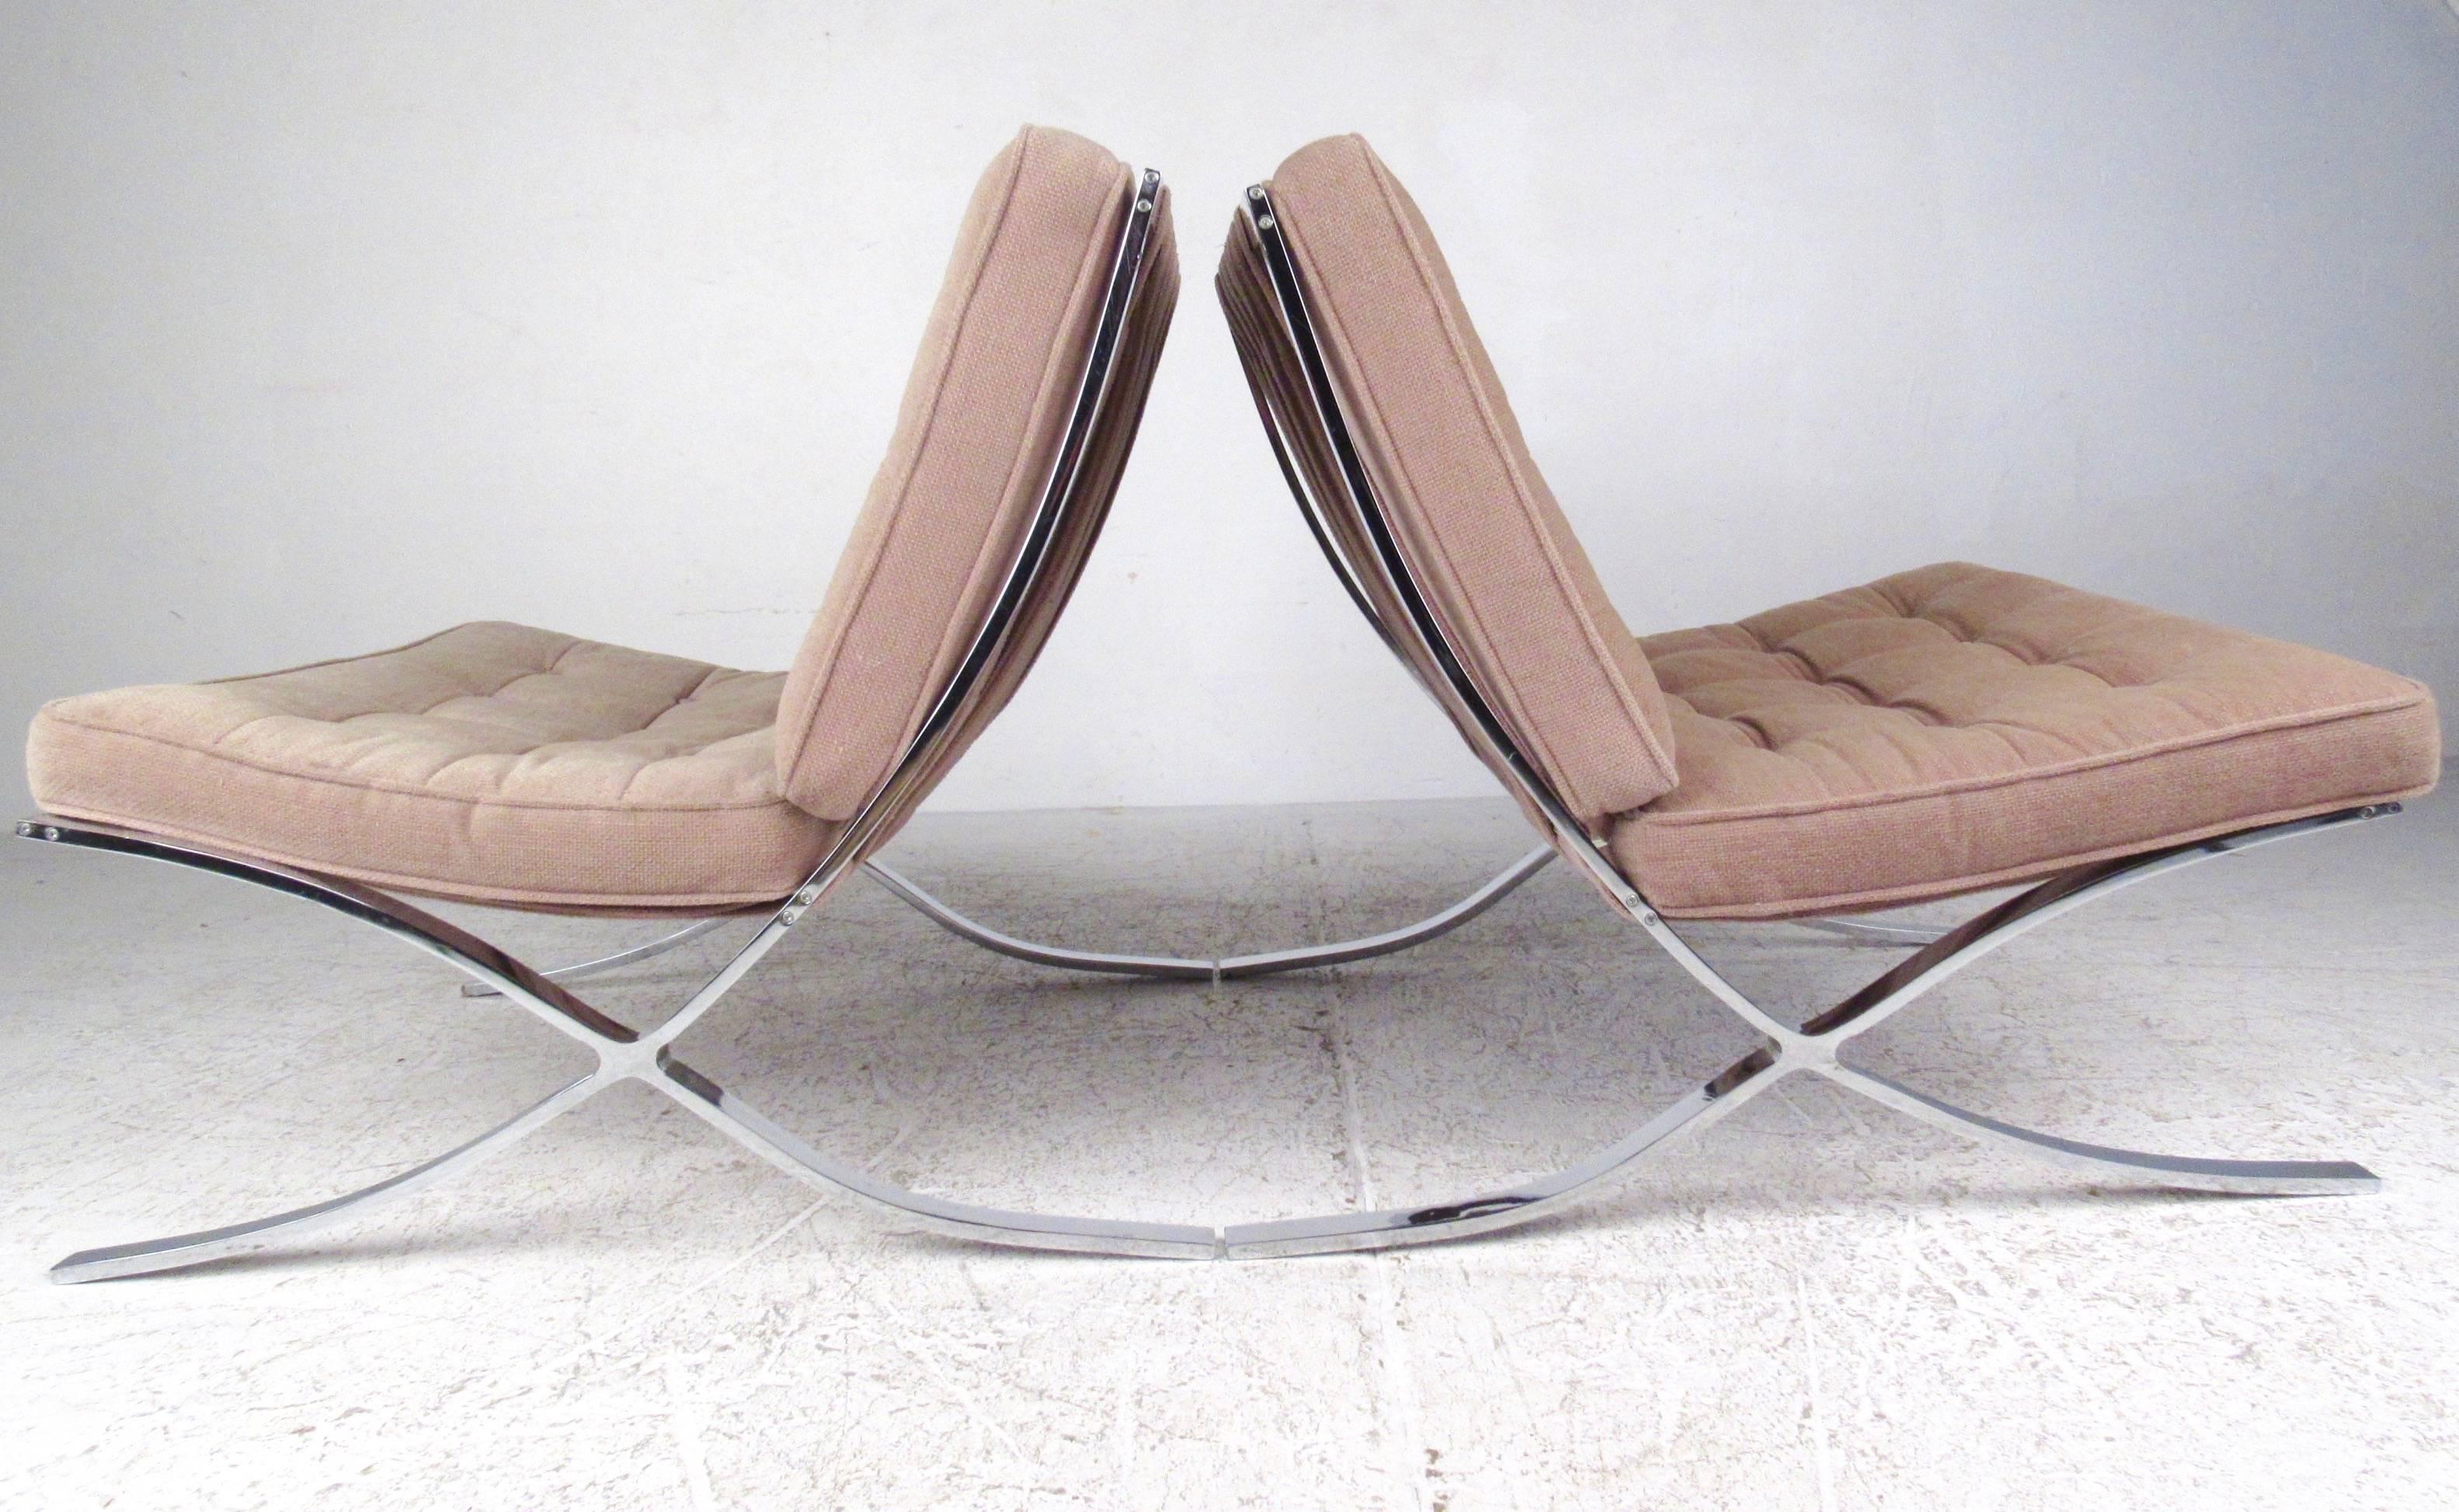 This vintage pair of chrome-plated lounge chairs feature the Mid-Century Barcelona style of Ludwig Mies van der Rohe. The curved metal frames and fabric strap backs showcase the distinctive modern design of the Mid-Century designer, providing a